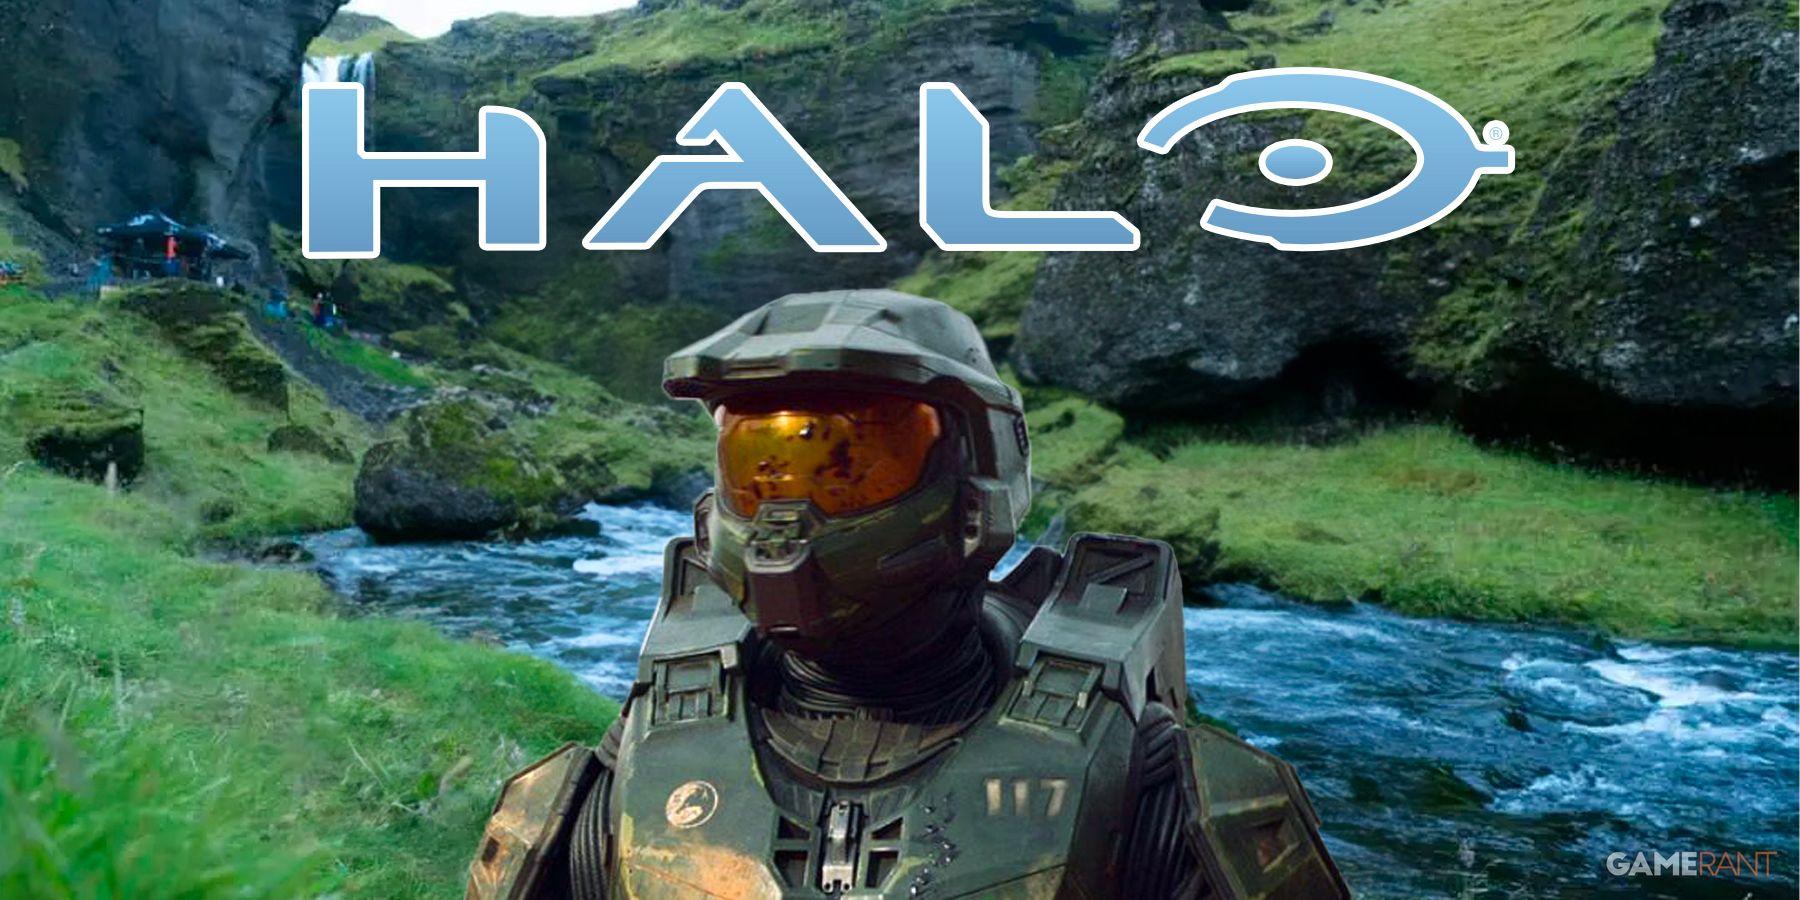 Halo Season 2 Release Date Accidentally Announced By Paramount Plus